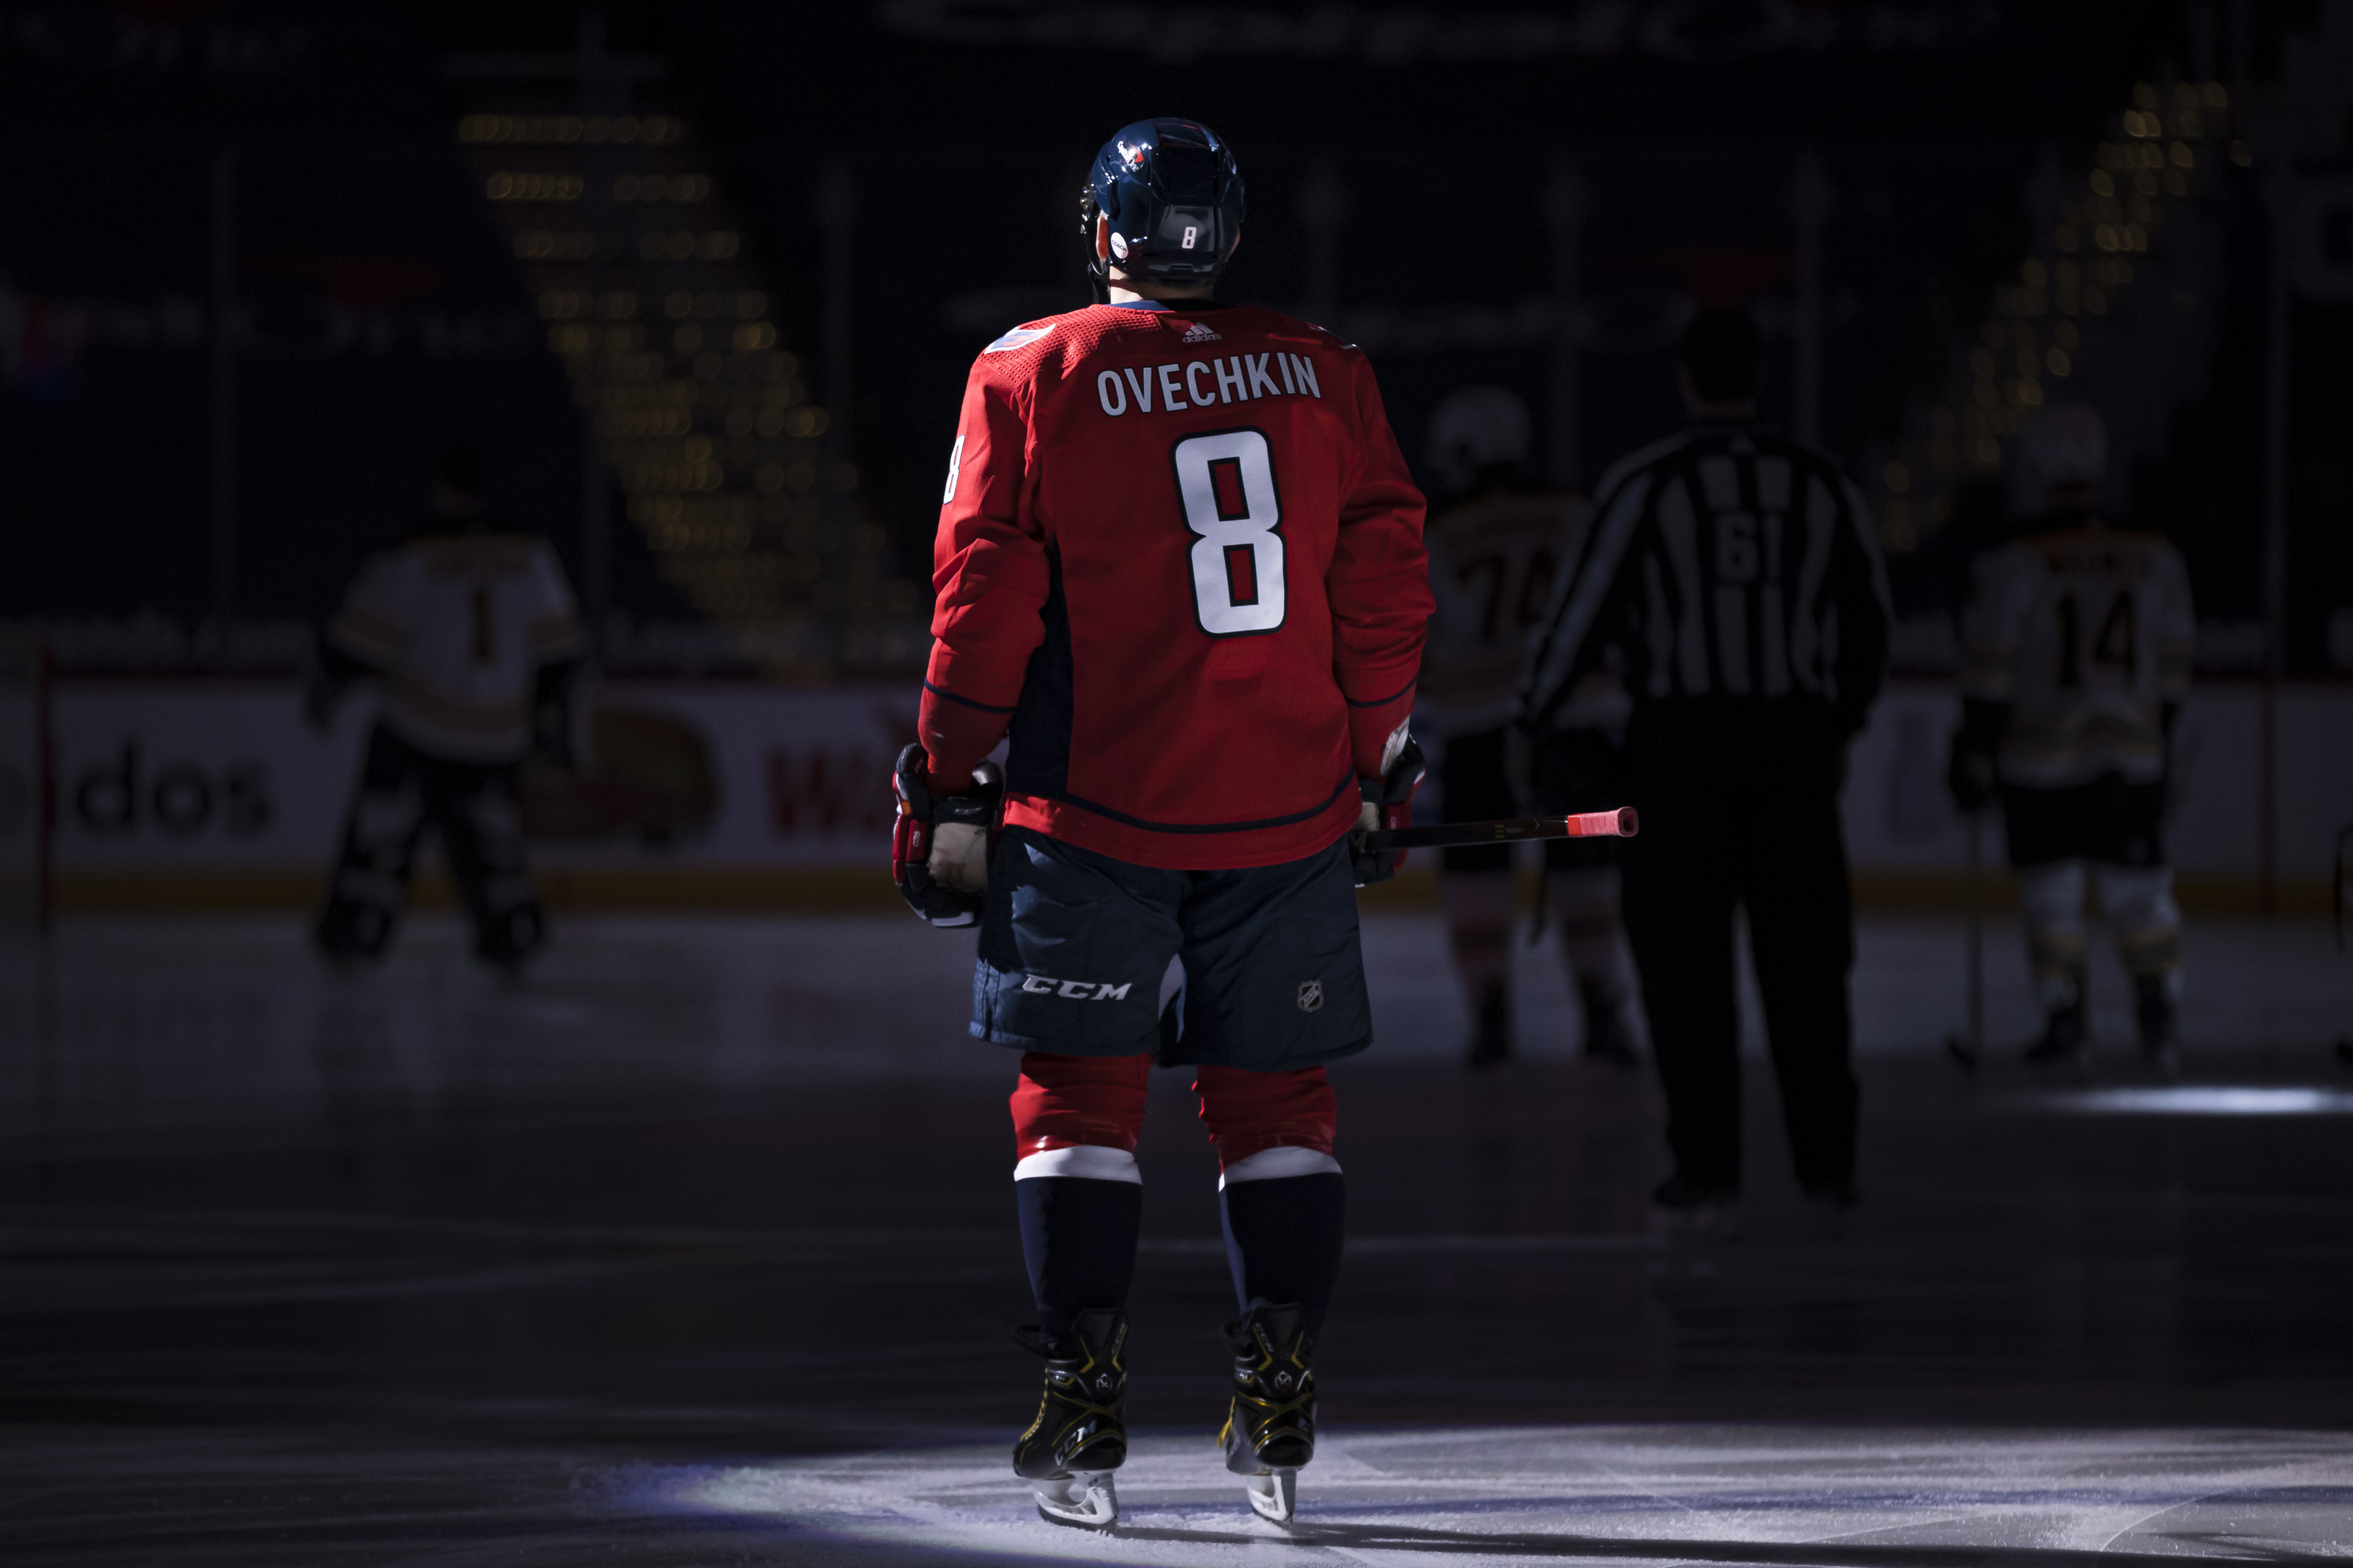 Capitals' Ovechkin: It's Just Something Special 